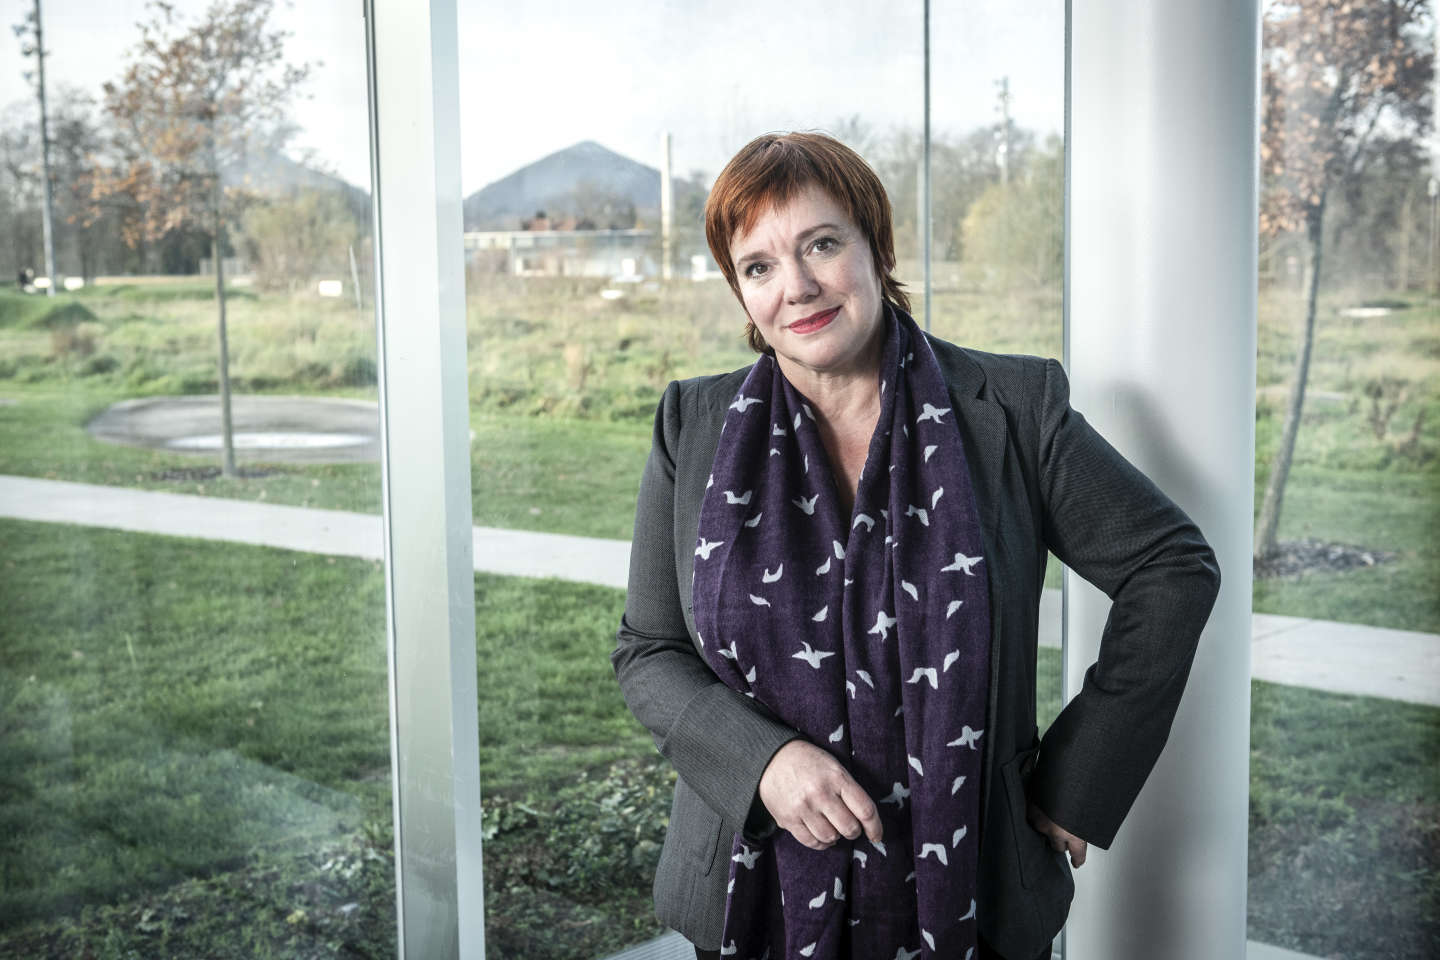 Marie Lavandier is appointed head of the Center des Monuments Nationaux